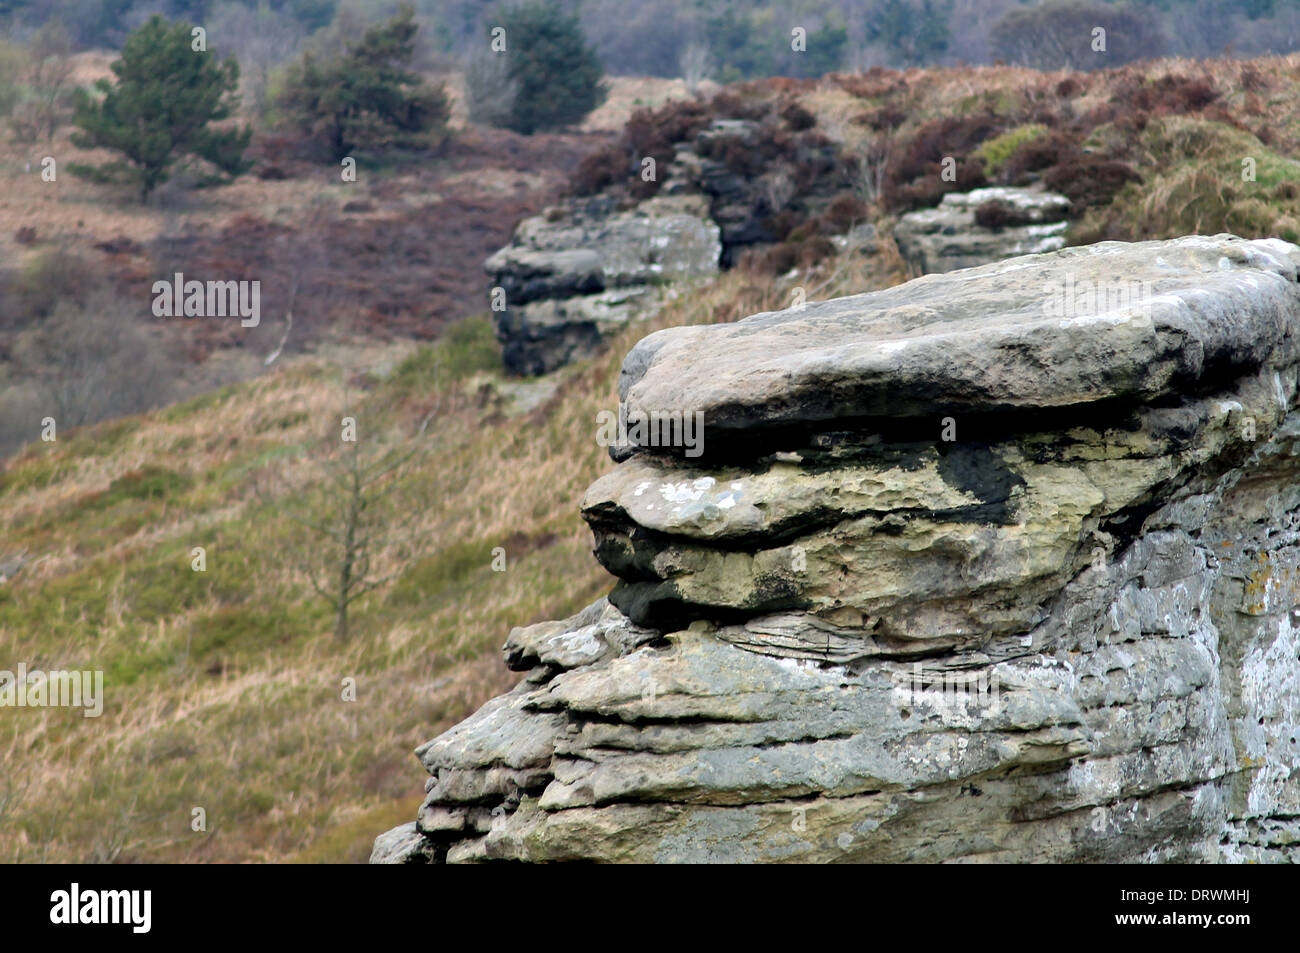 Scenic view of unusual rock formations on North Yorkshire moors, England. Stock Photo